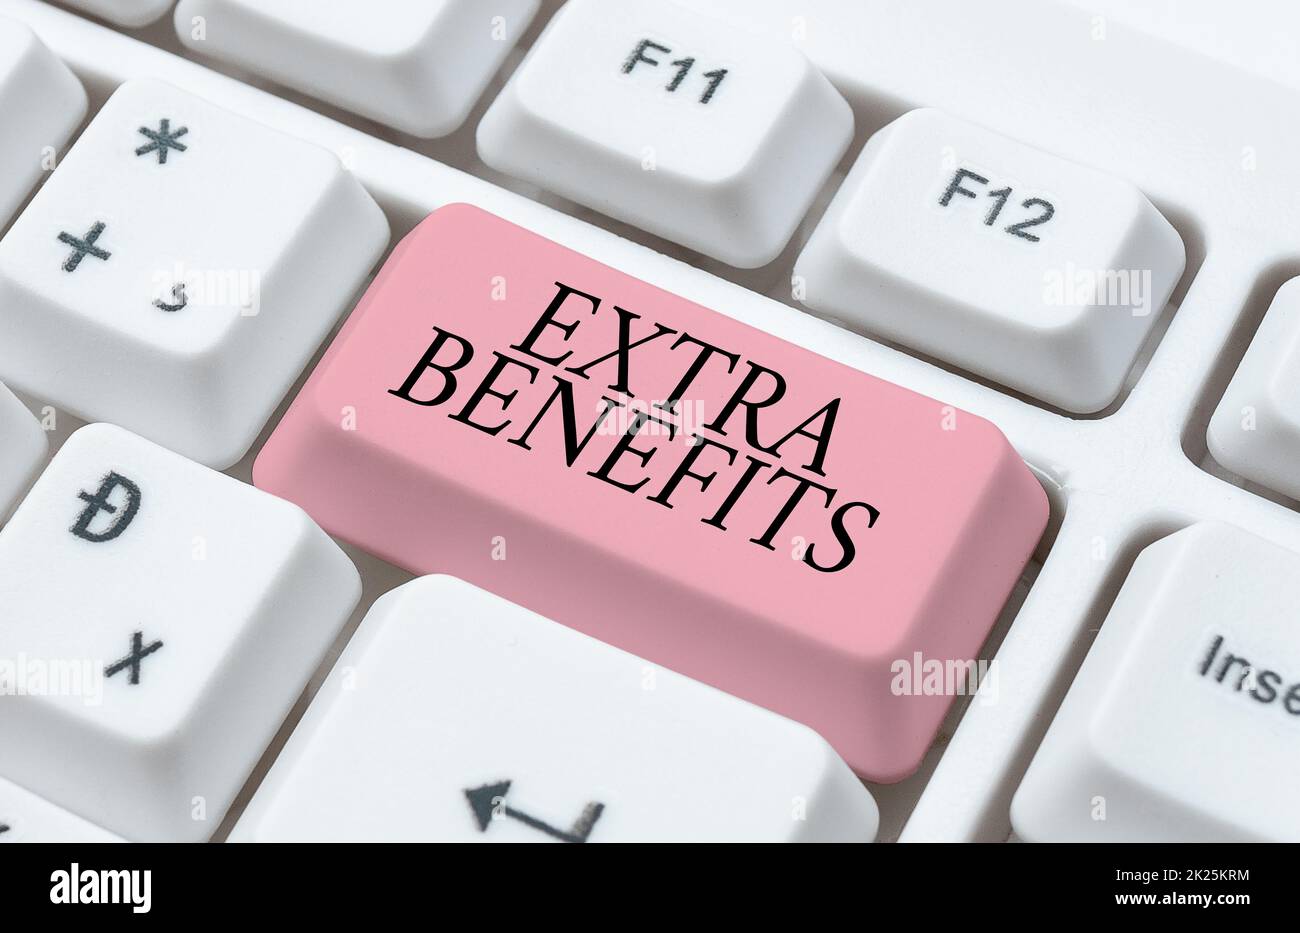 Sign displaying Extra Benefits. Business approach Additional compensation Bonus Subsidies Incentives Allowances Typing Online Network Protocols, Creating New Firewall Program Stock Photo